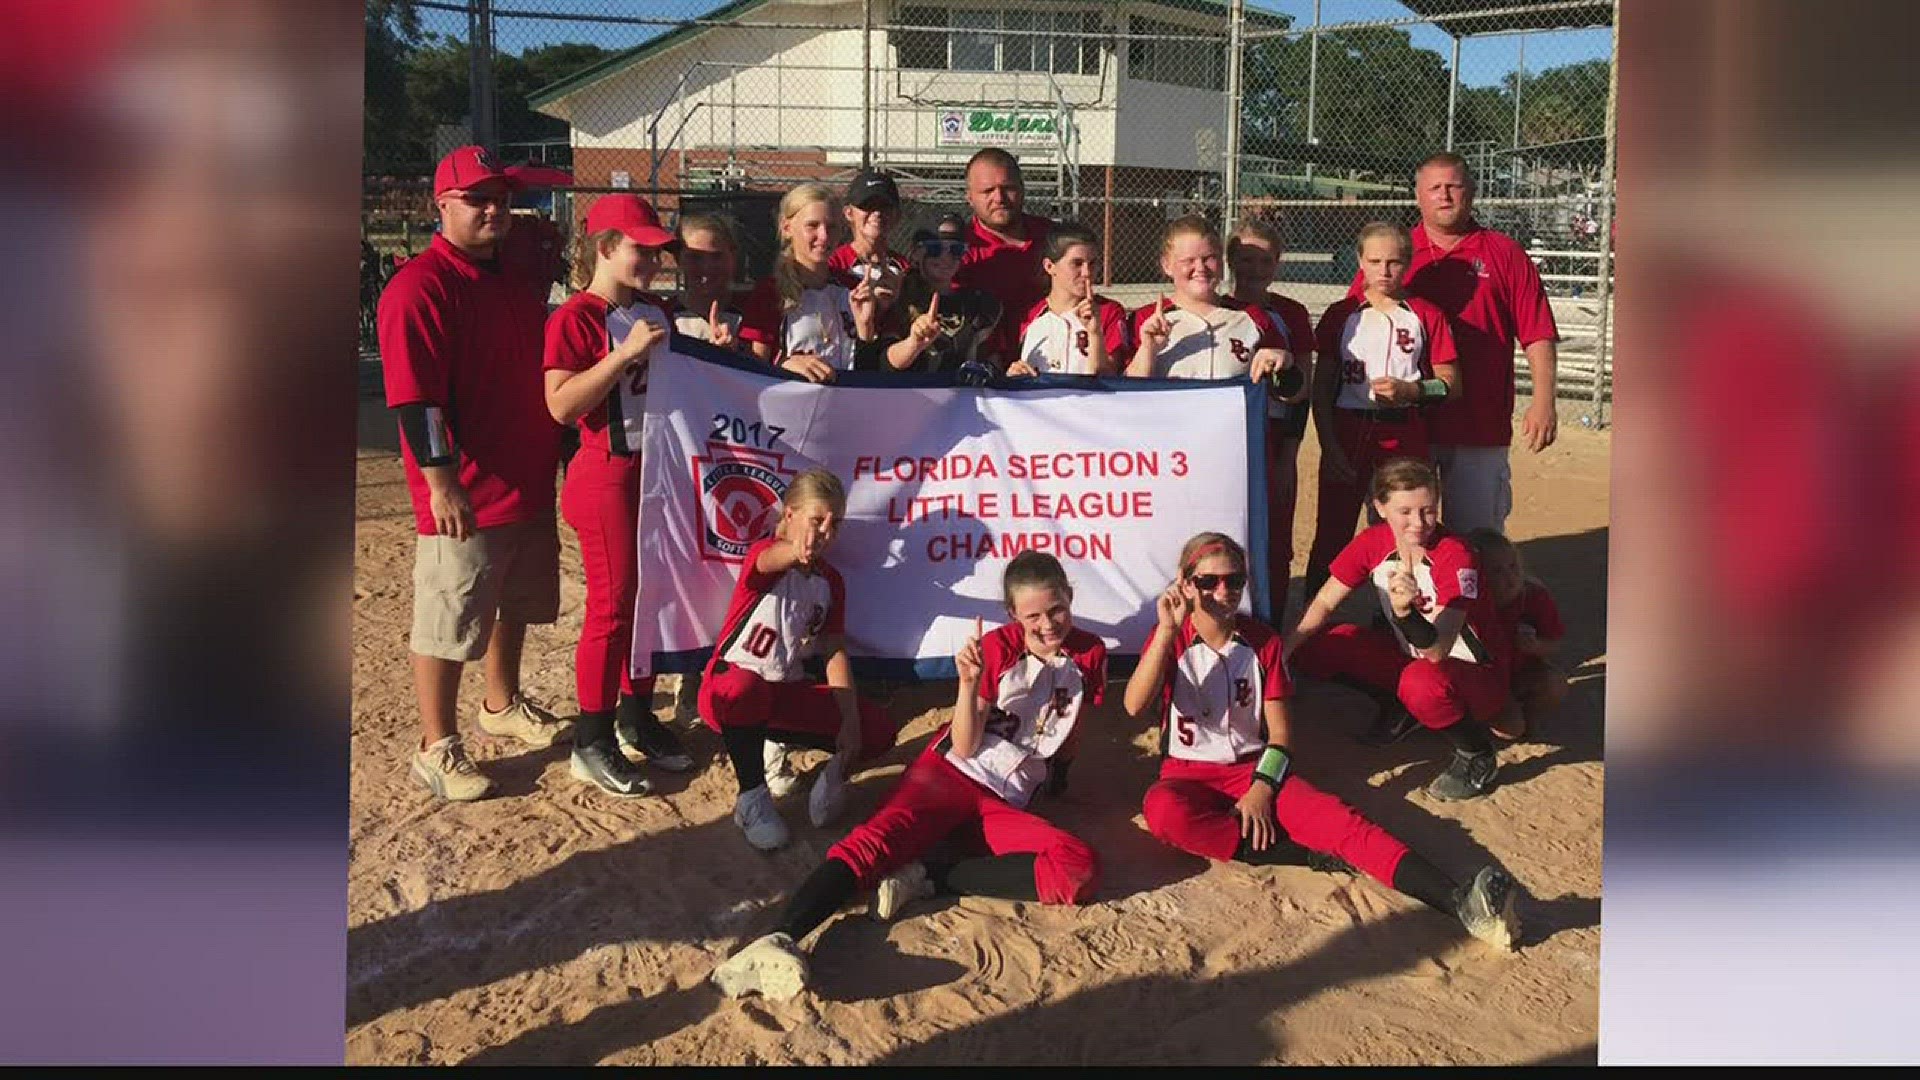 Baker County Little League Softball heading to the championship.